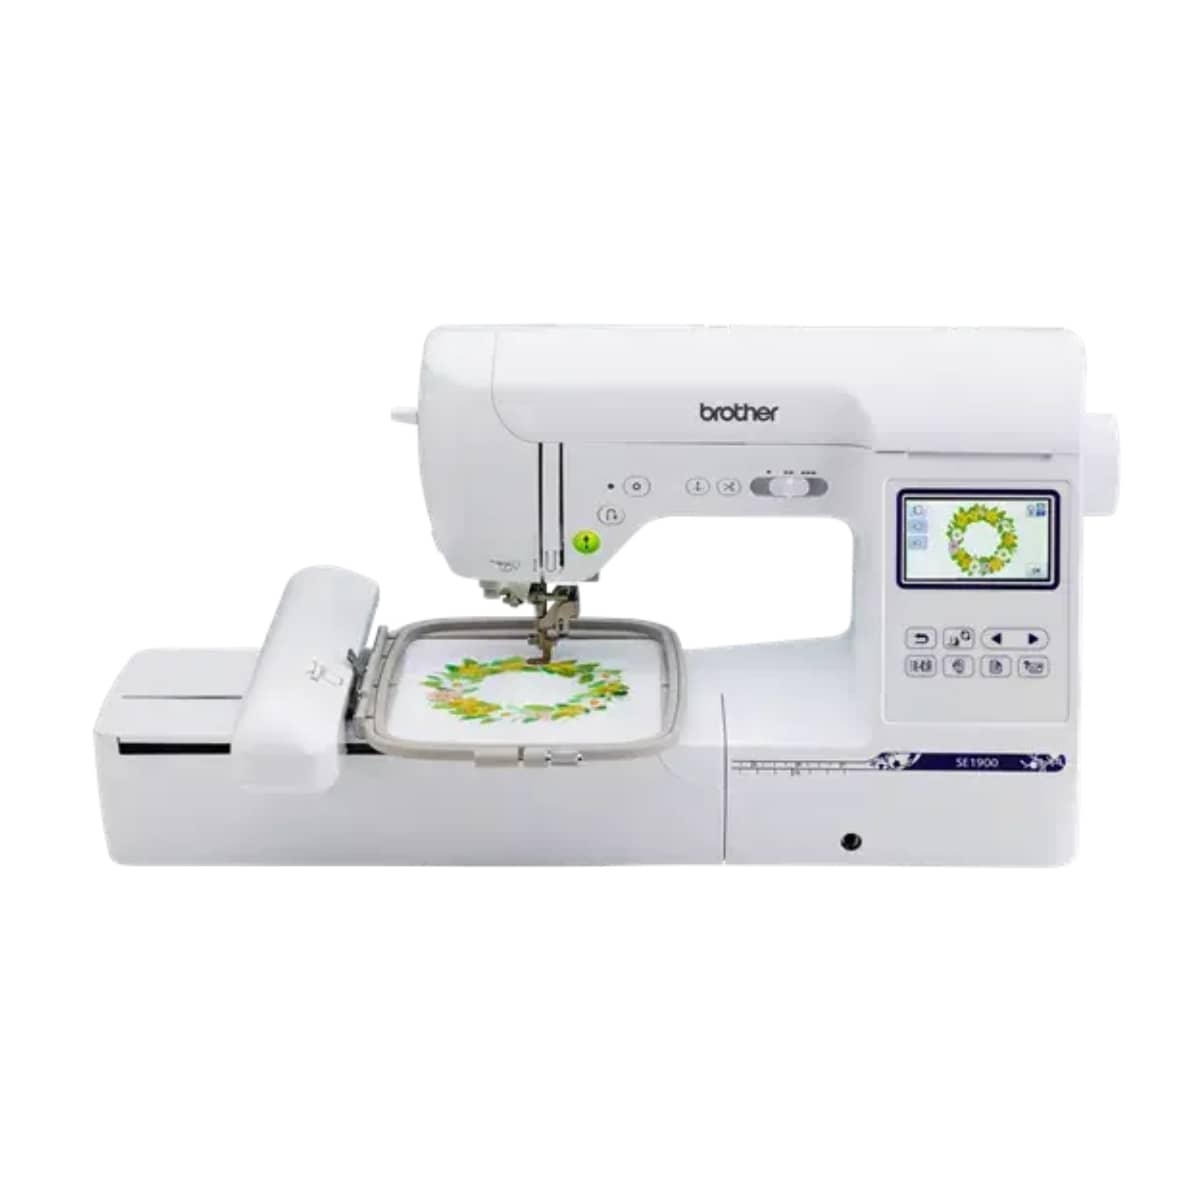 Brother Embroidery Machines for sale in Salt Lake City, Utah